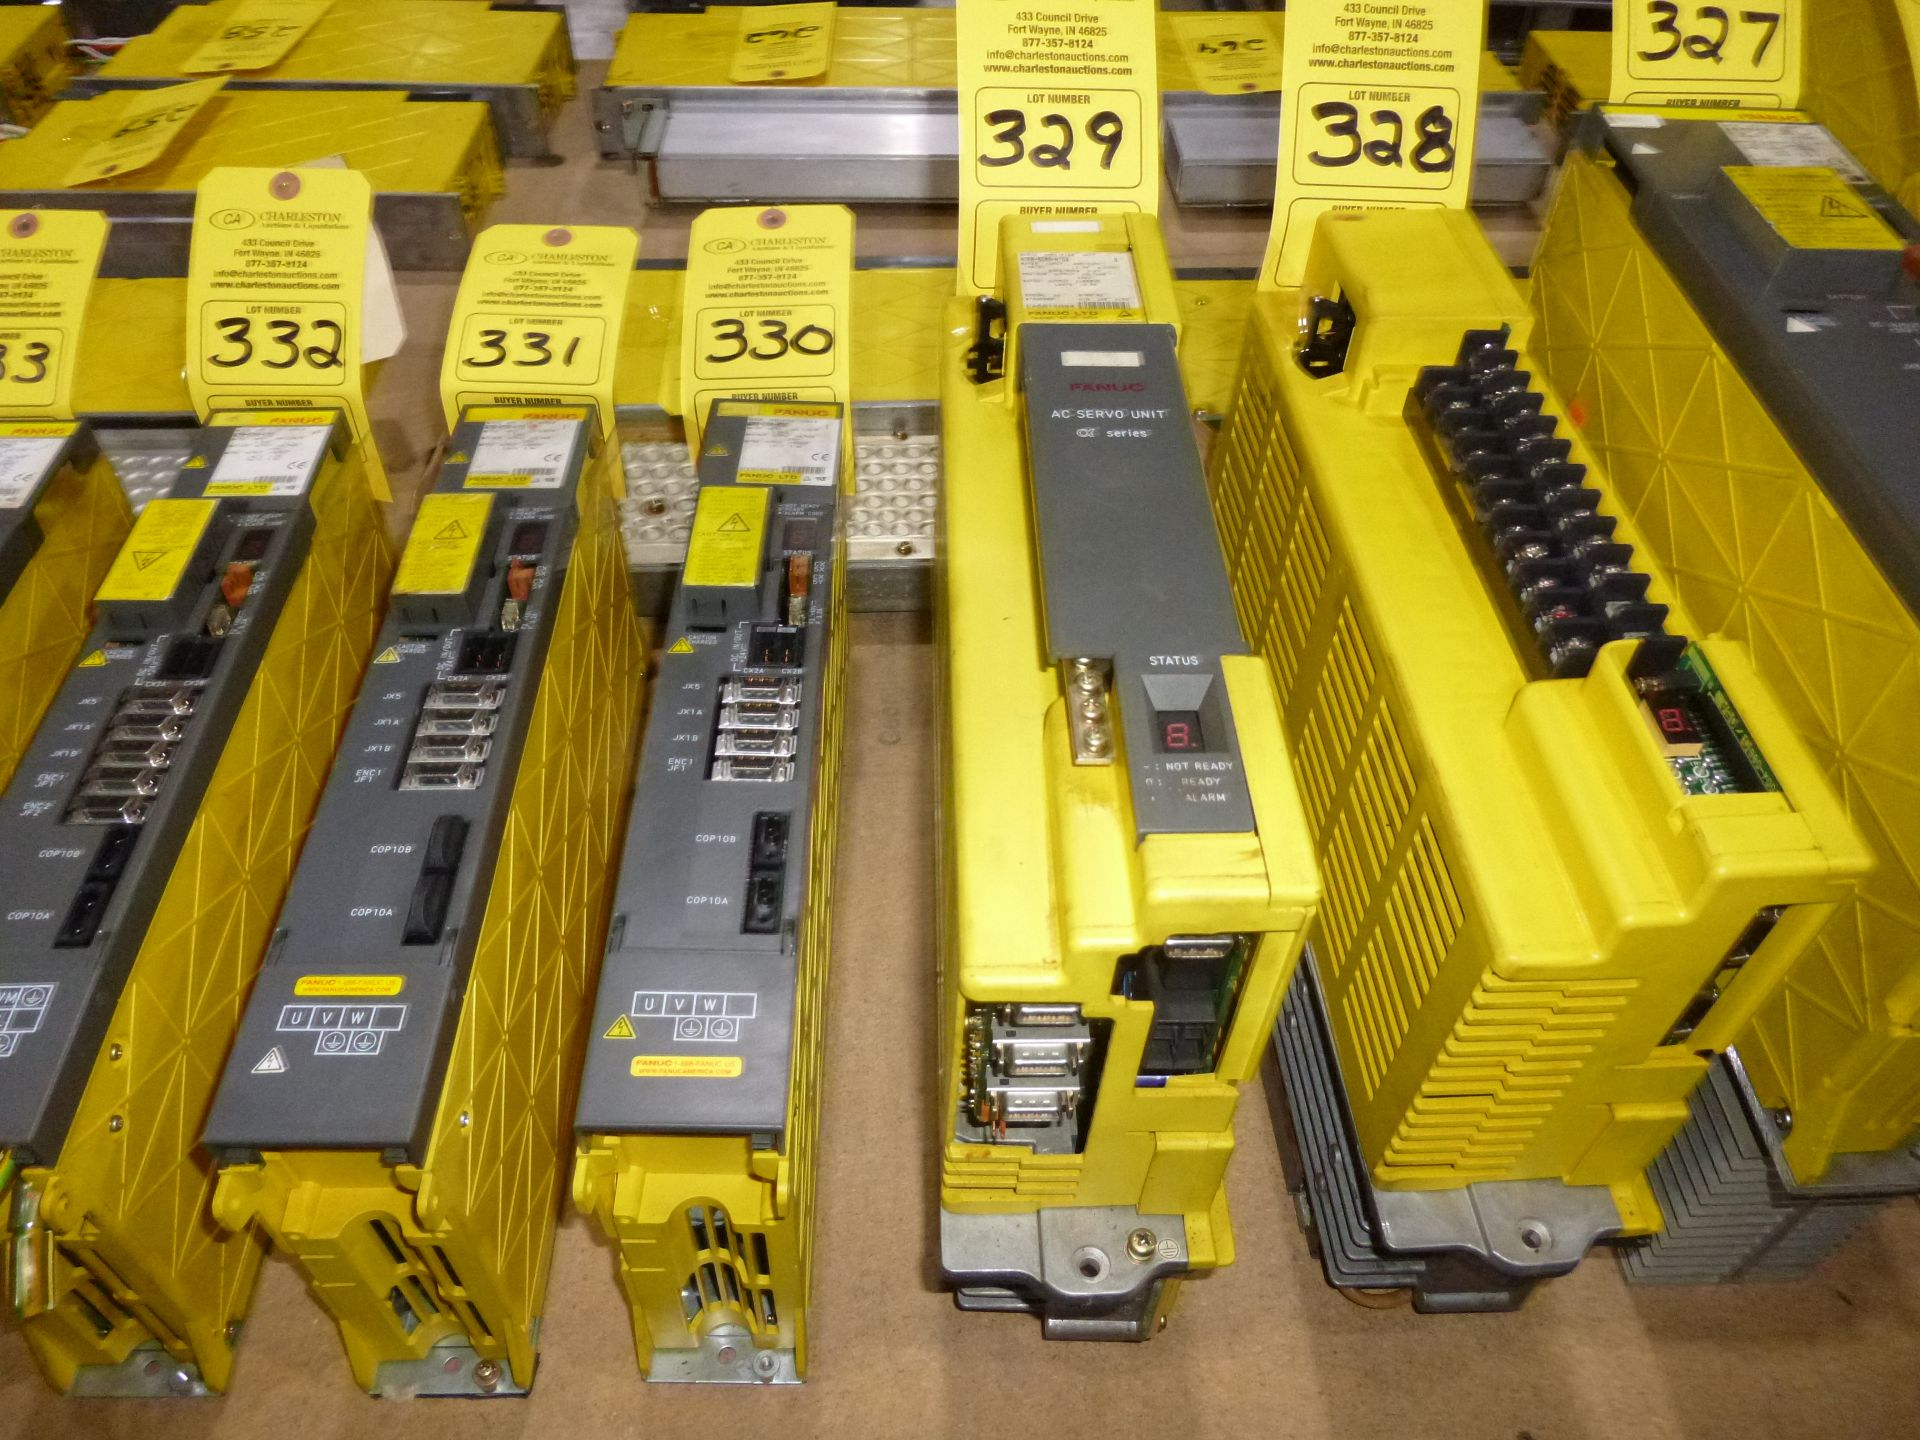 Fanuc servo amplifier unit model A06B-6089-H104, as always with Brolyn LLC auctions, all lots can be